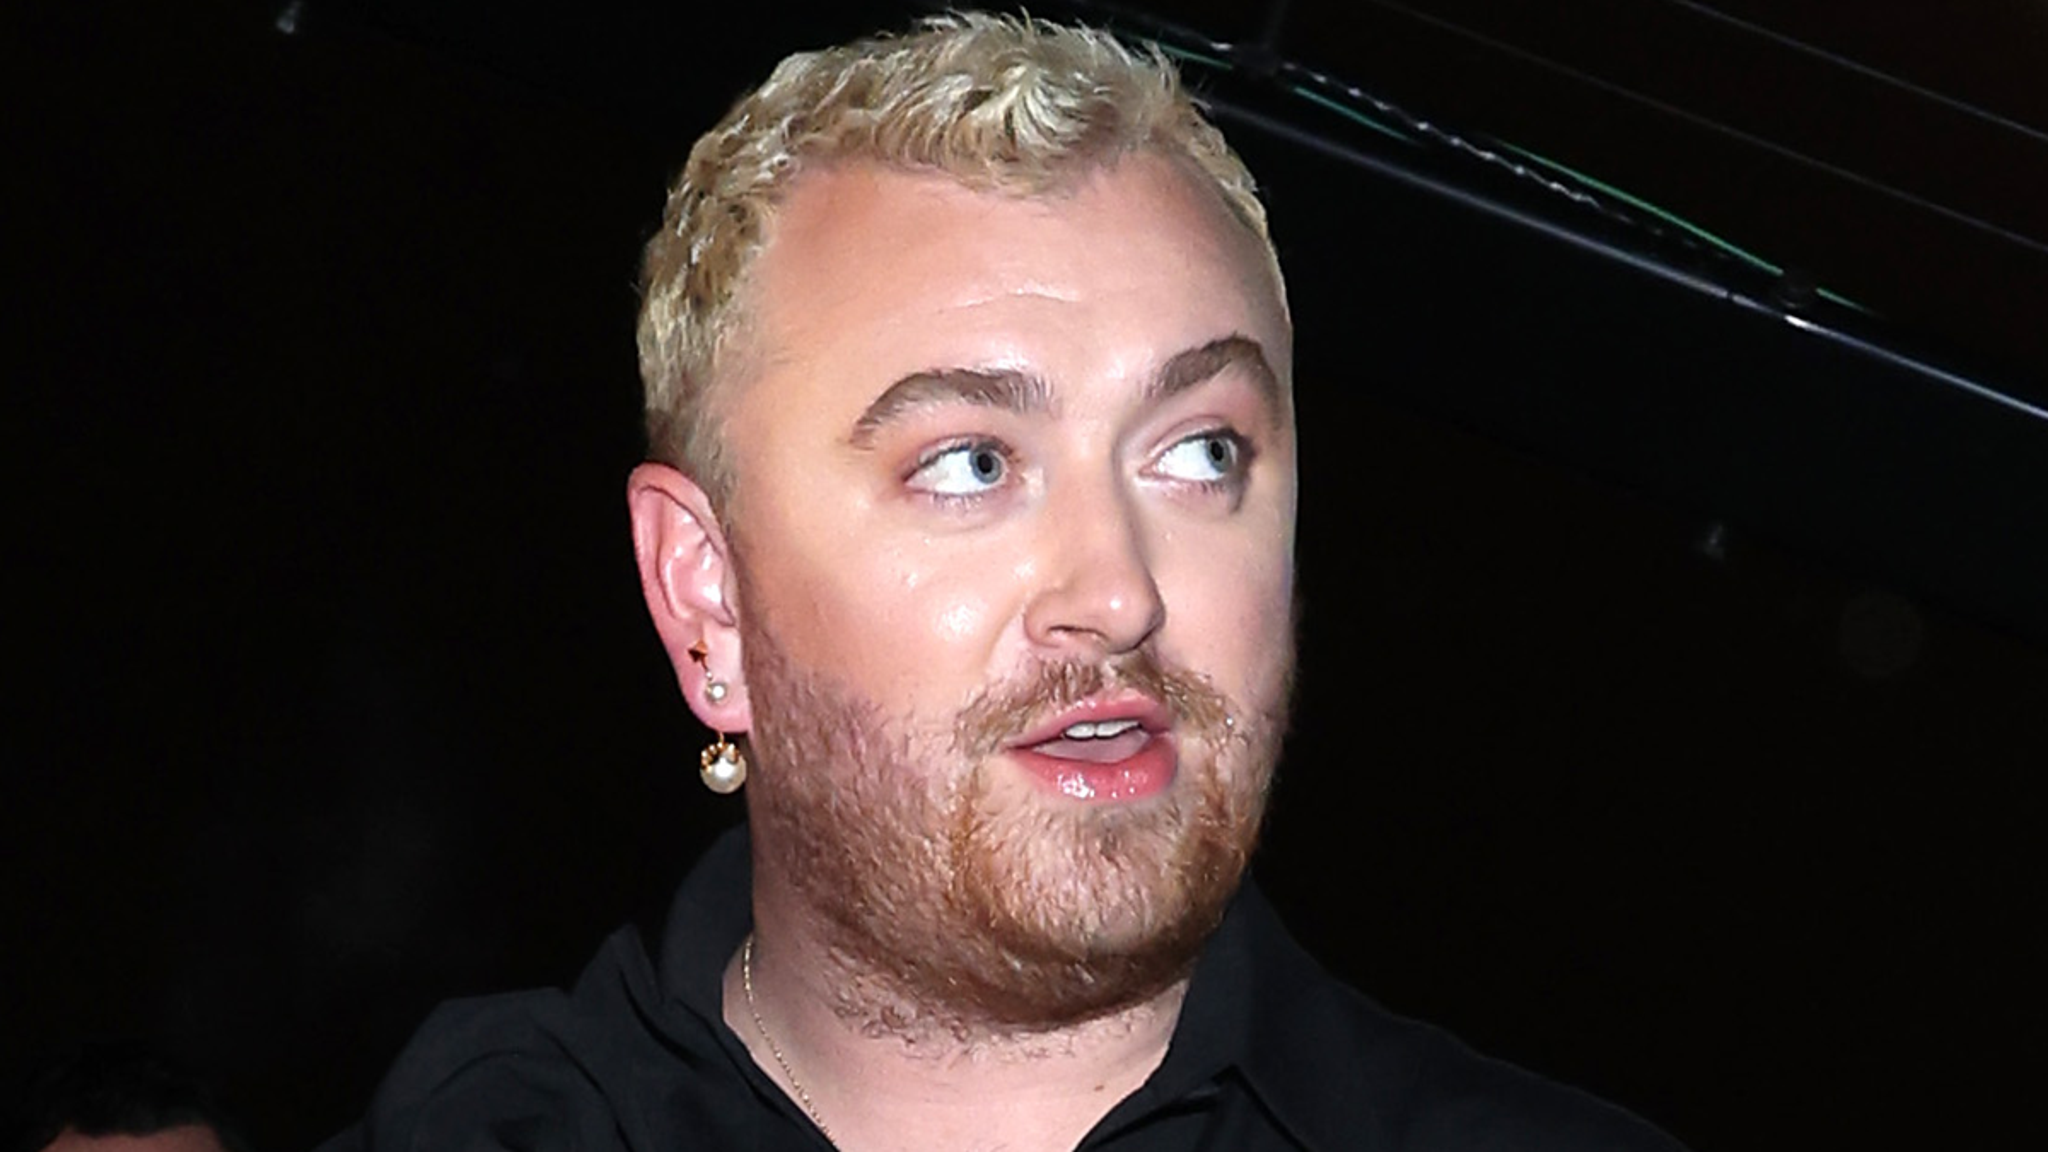 Sam Smith’s NSFW Music Video Spurs Debate Over Age Restrictions